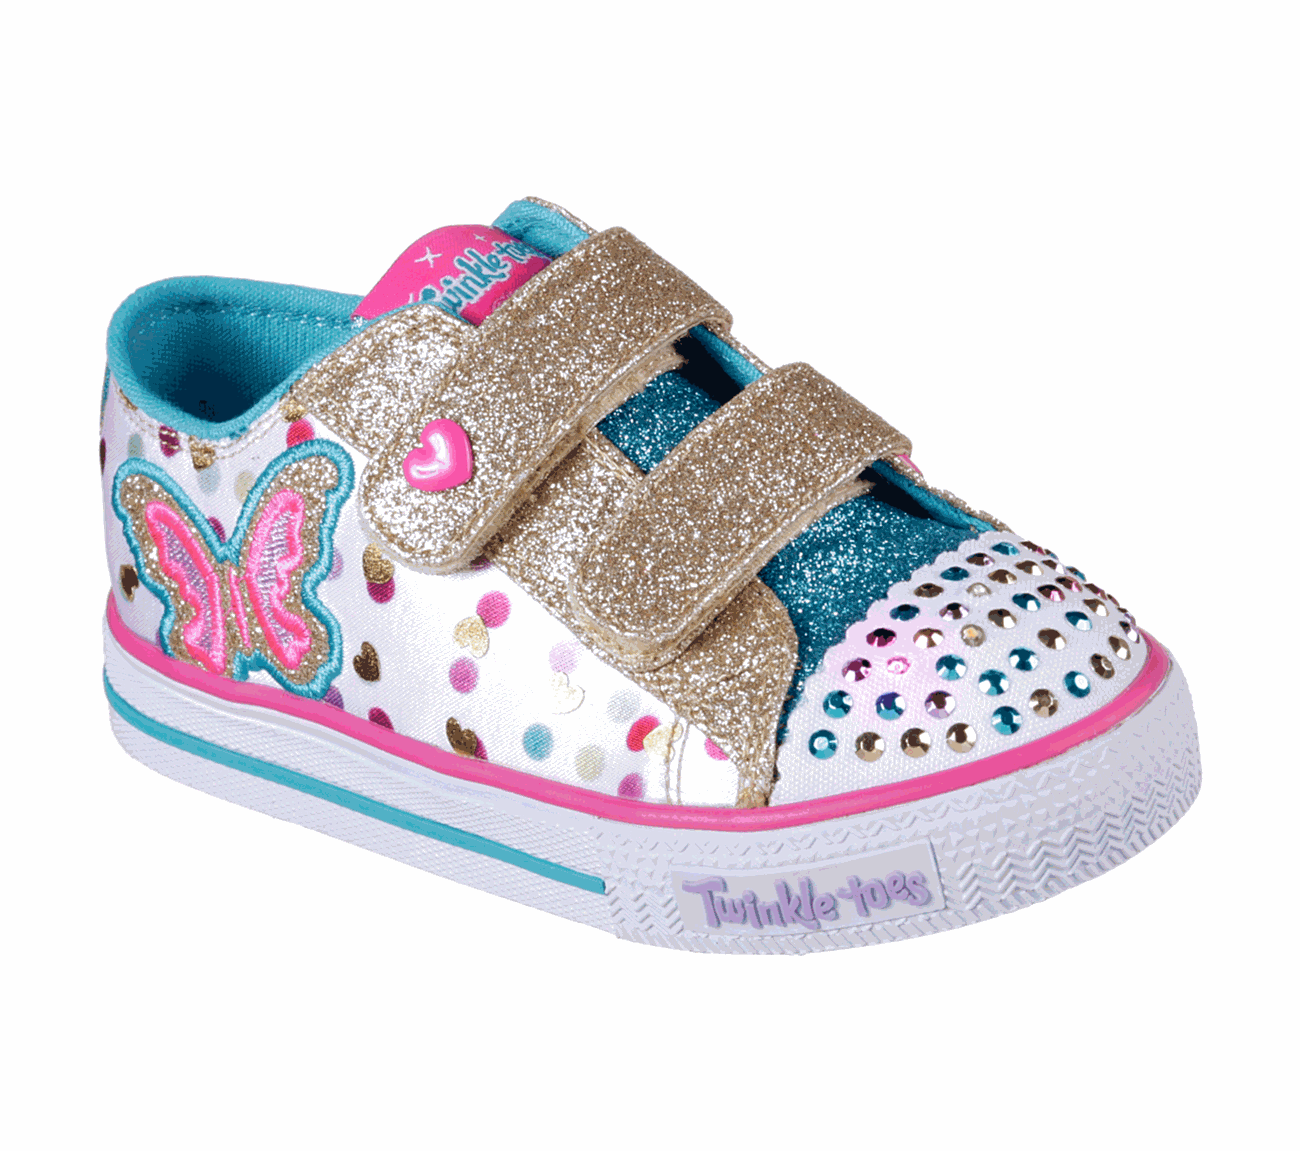 Buy SKECHERS Twinkle Toes: Shuffles - Steppin Buddies S-Lights Shoes